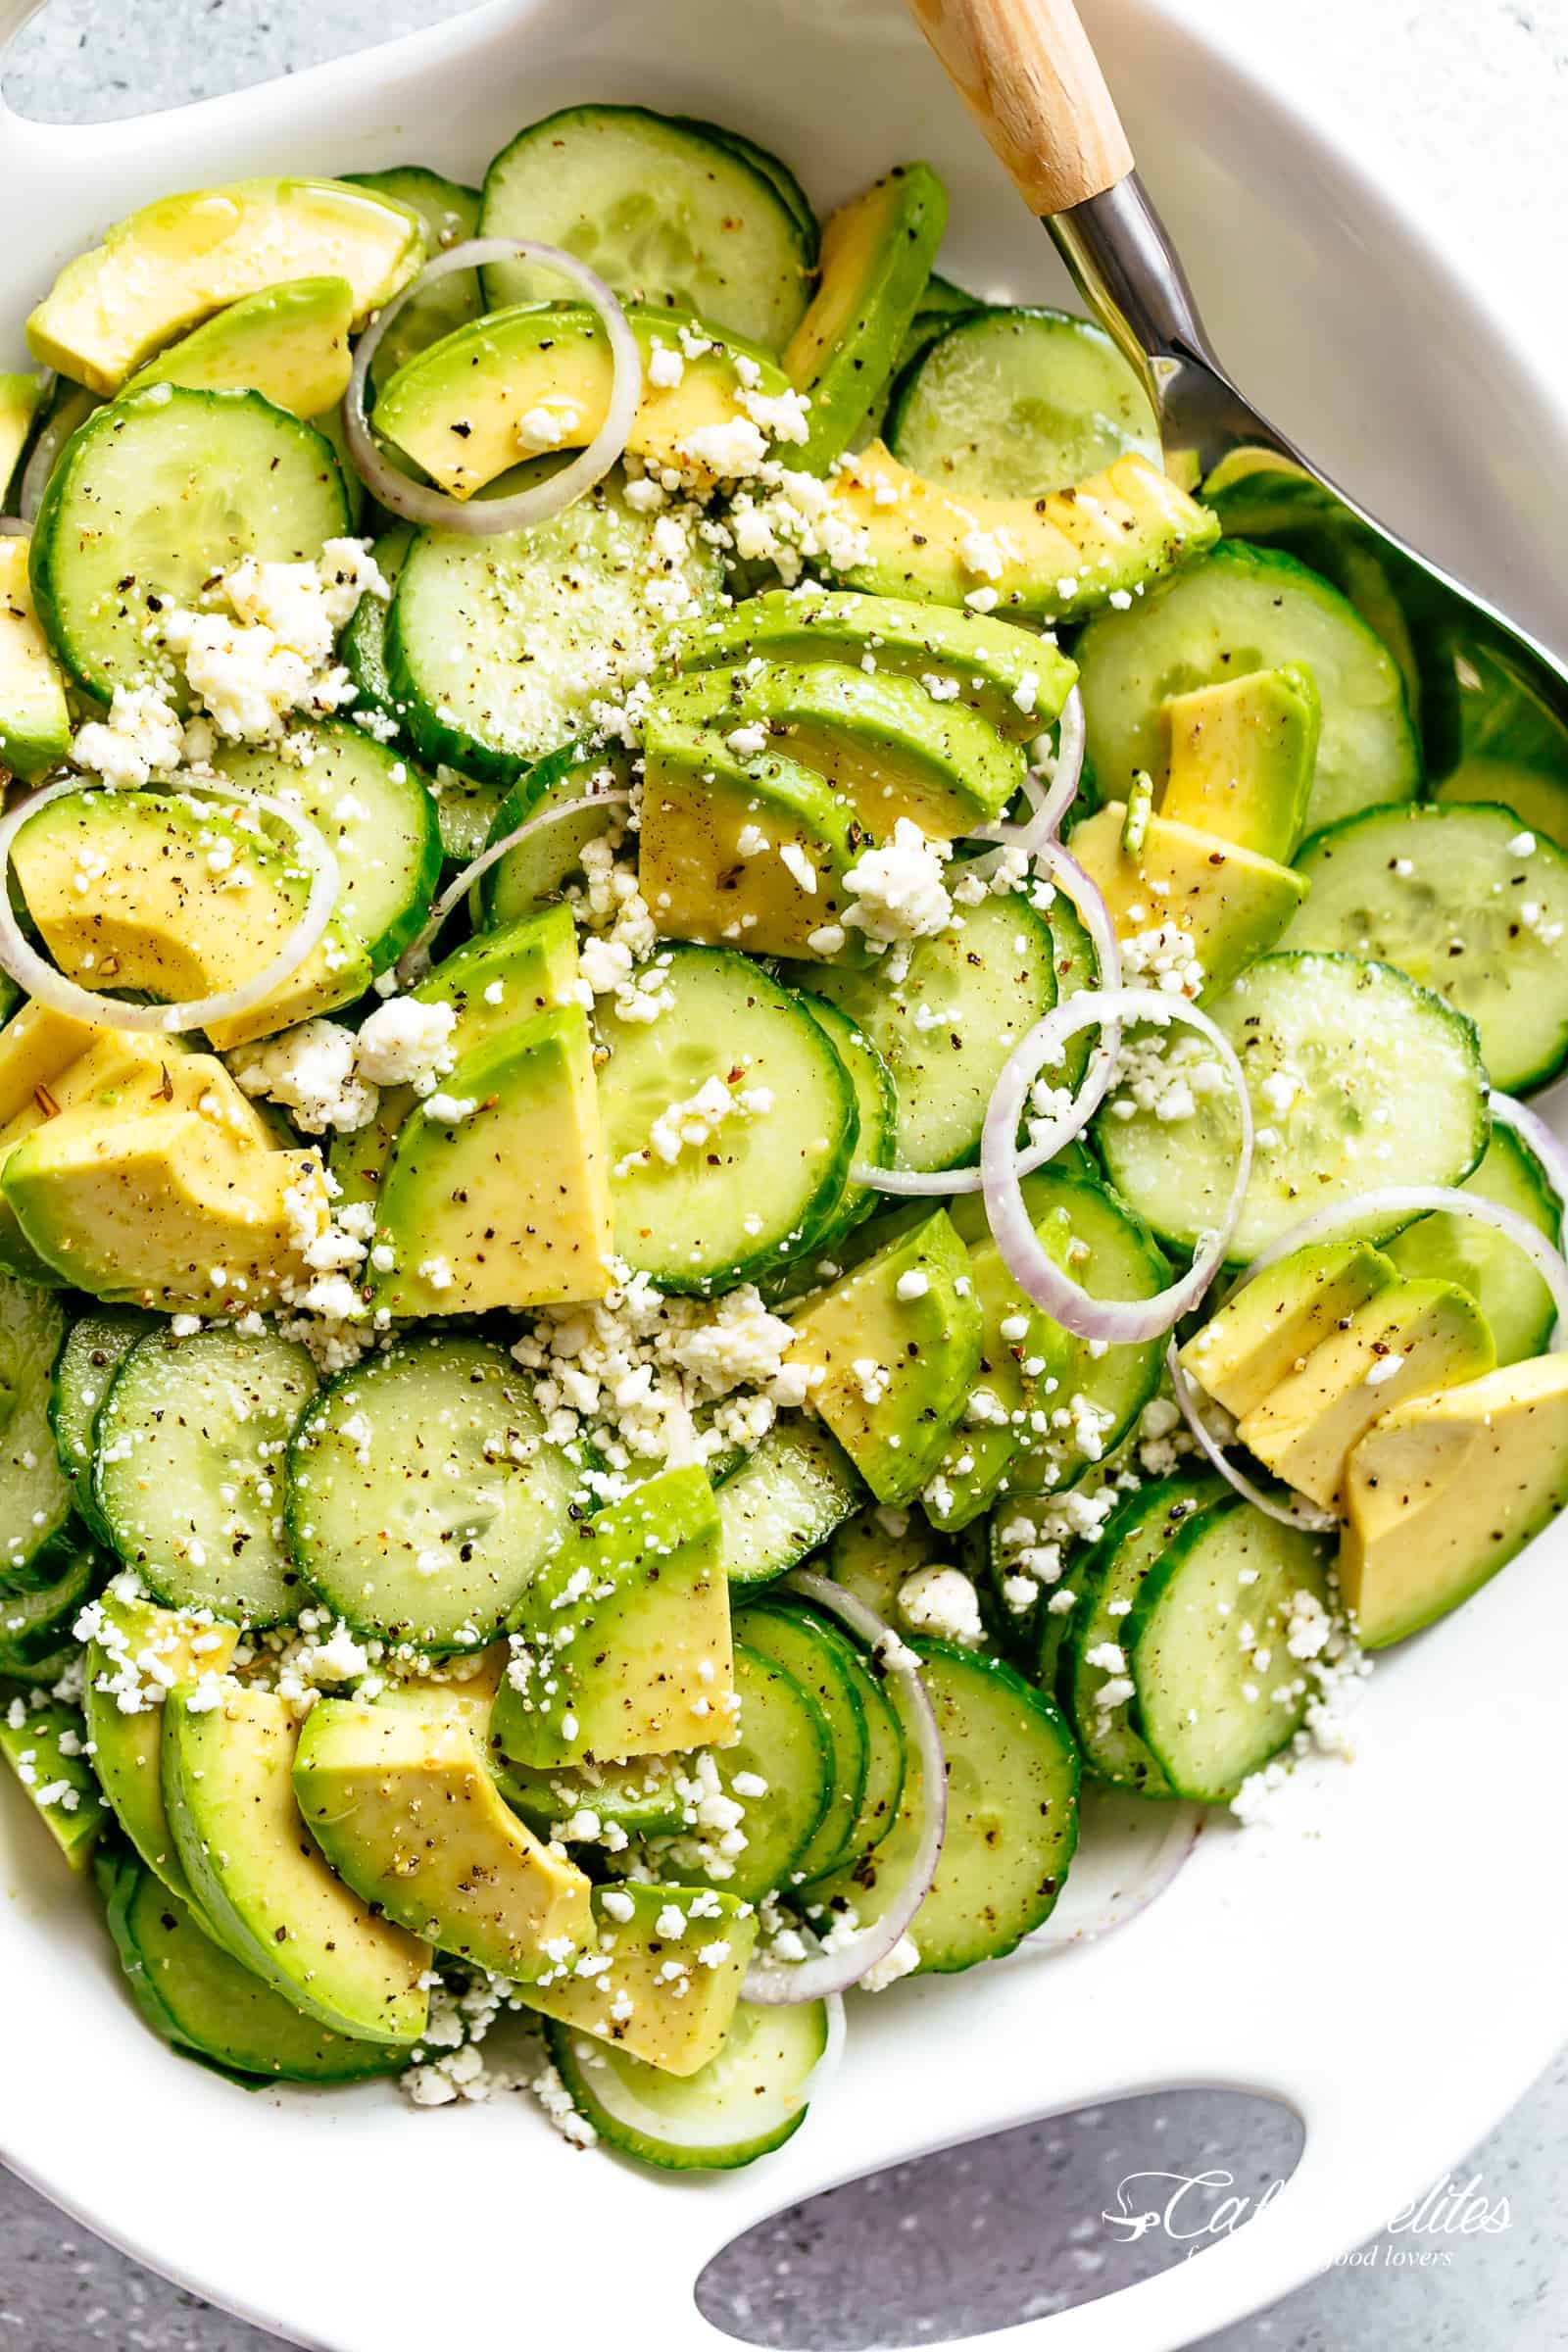 Avocado Feta Cucumber Salad with a delicious Greek inspired salad dressing or vinaigrette! The best side salad for any main meal. | cafedelites.com